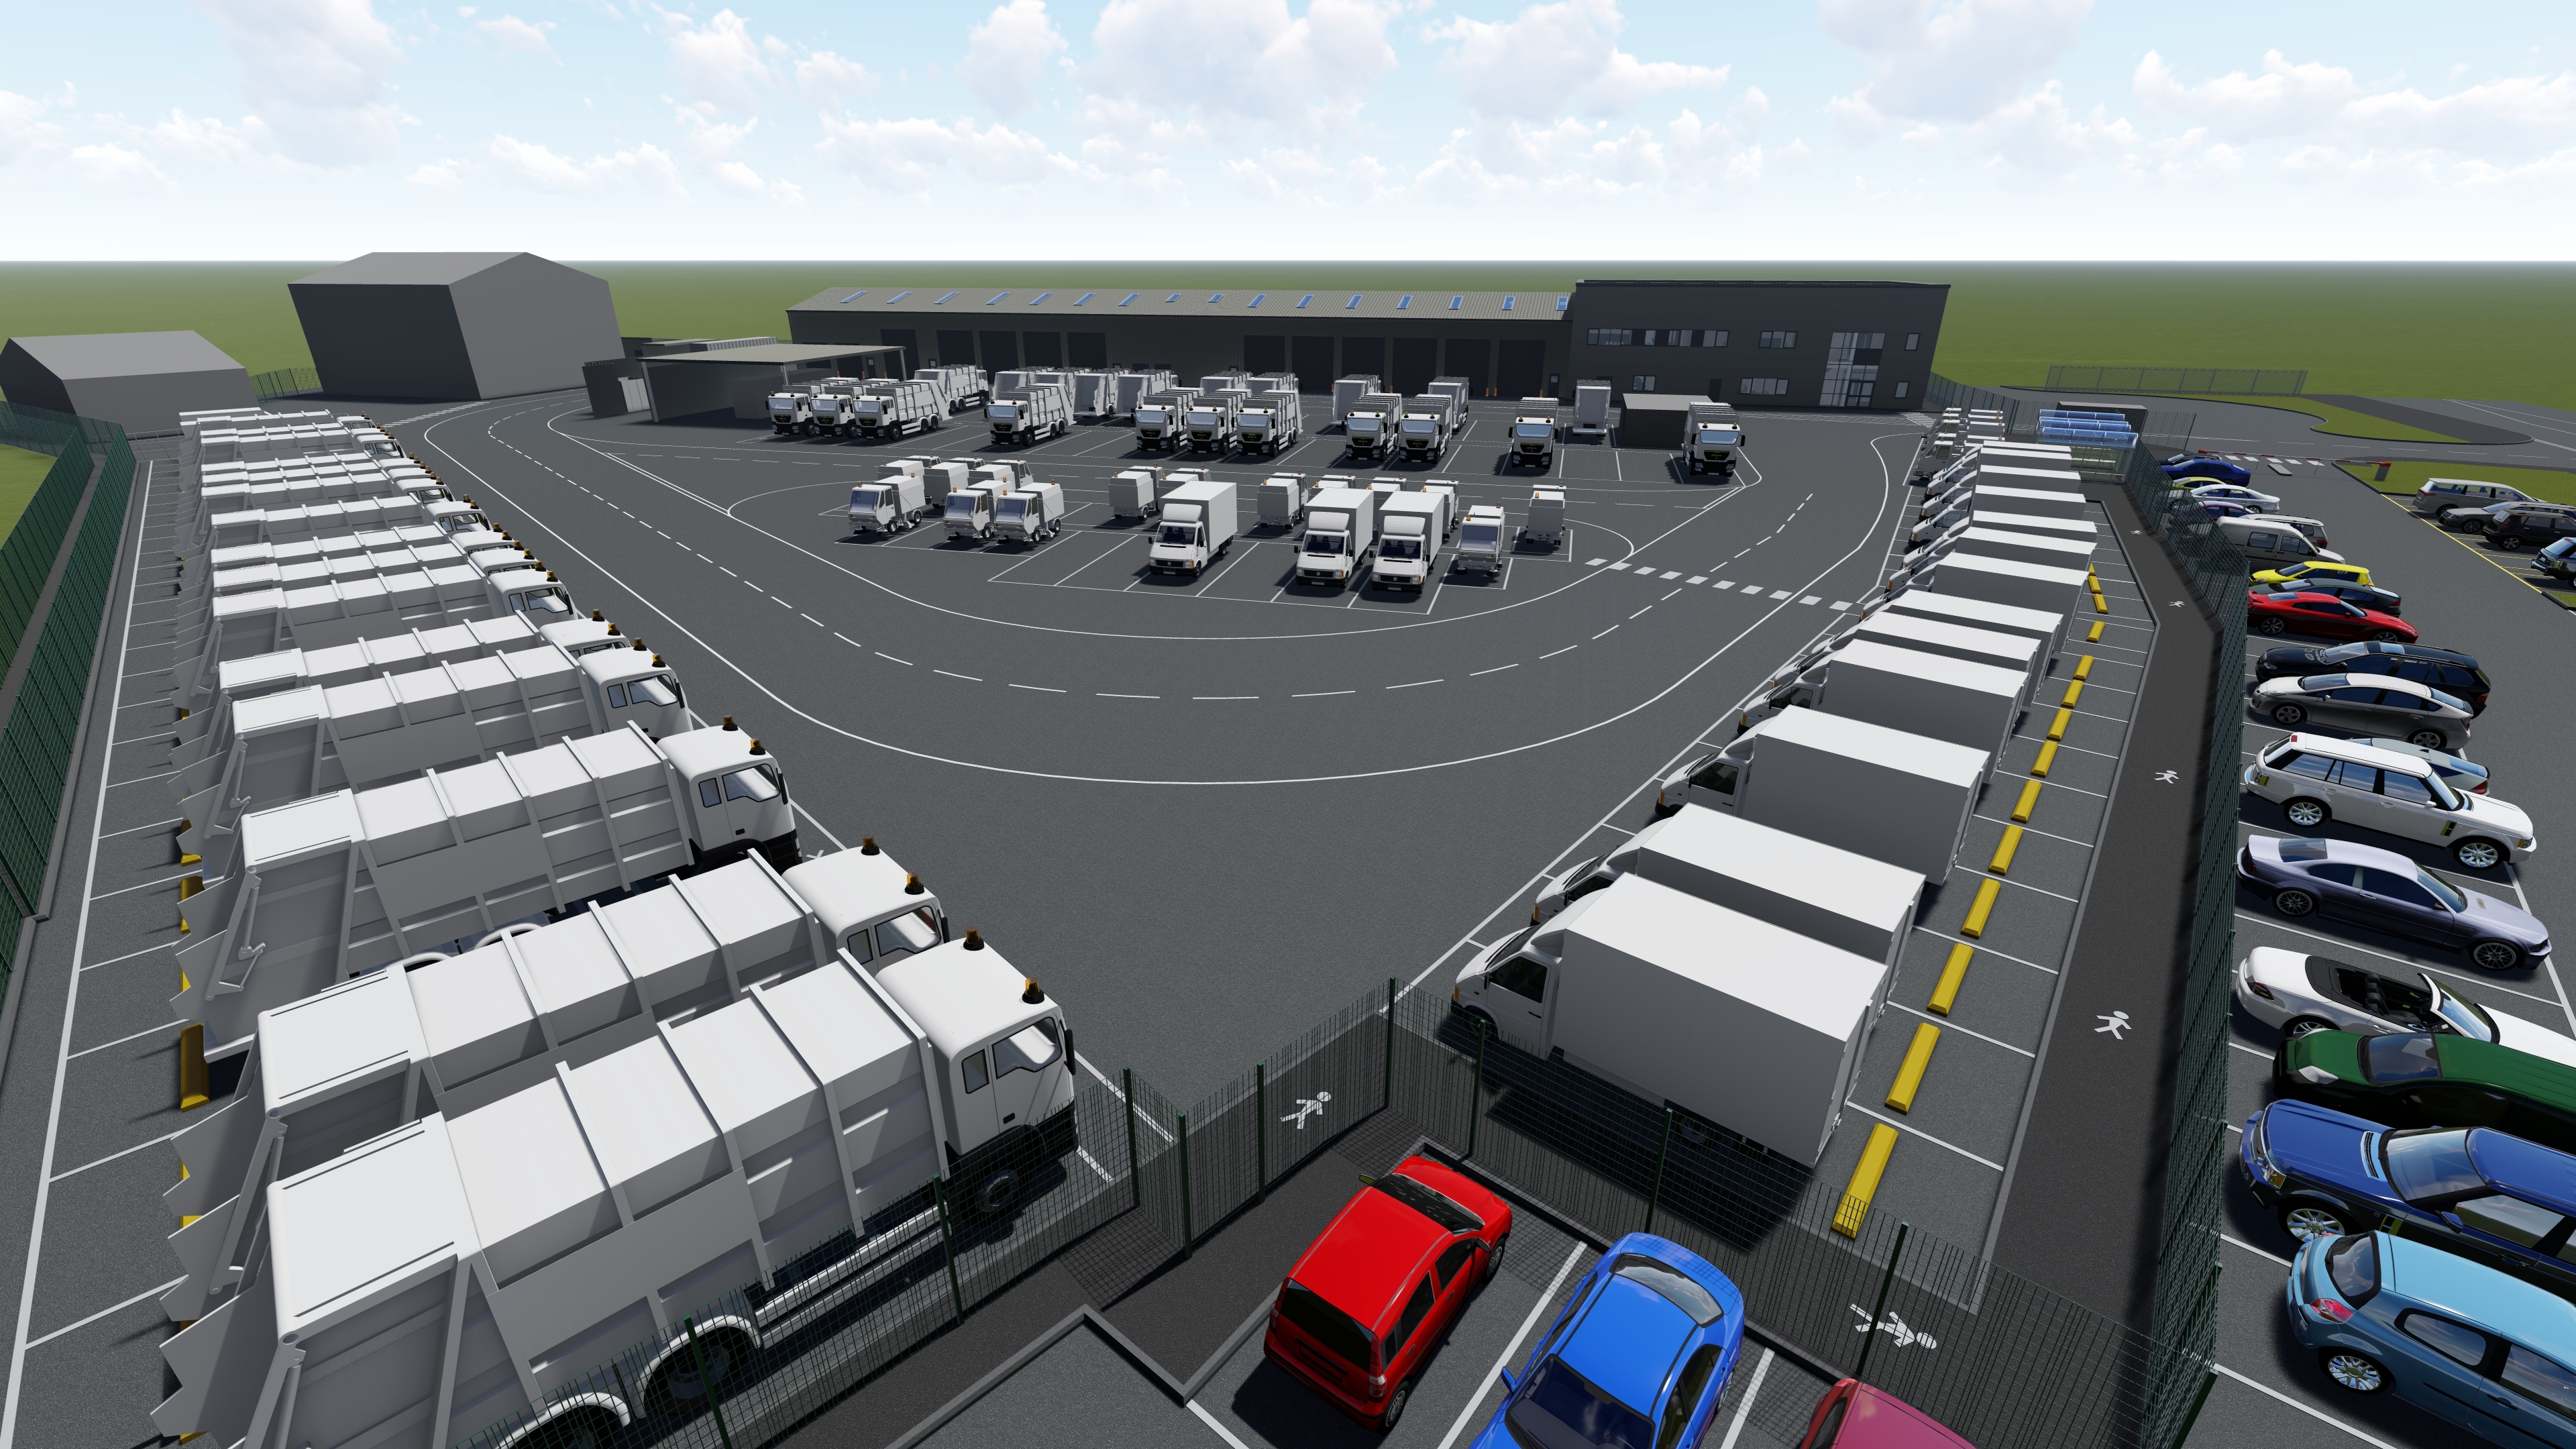 Appointed as lead contractor on Marsh Lane Depot image